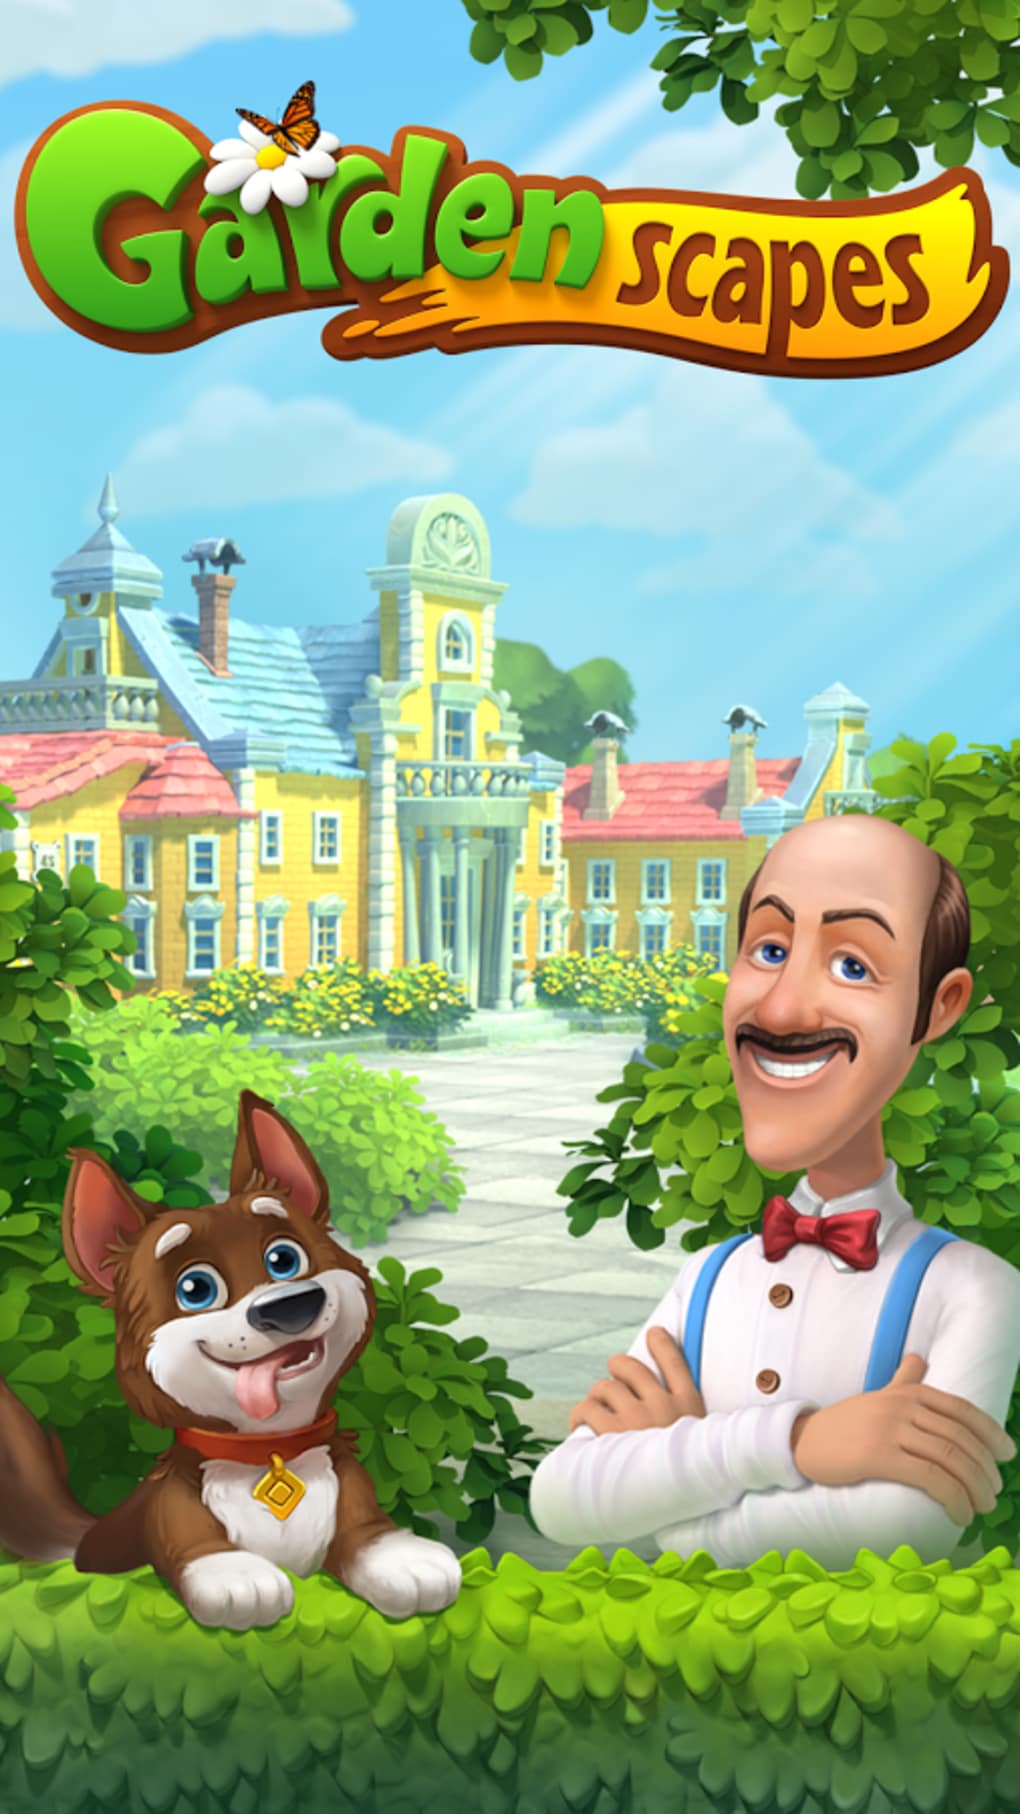 gardenscapes app for pc